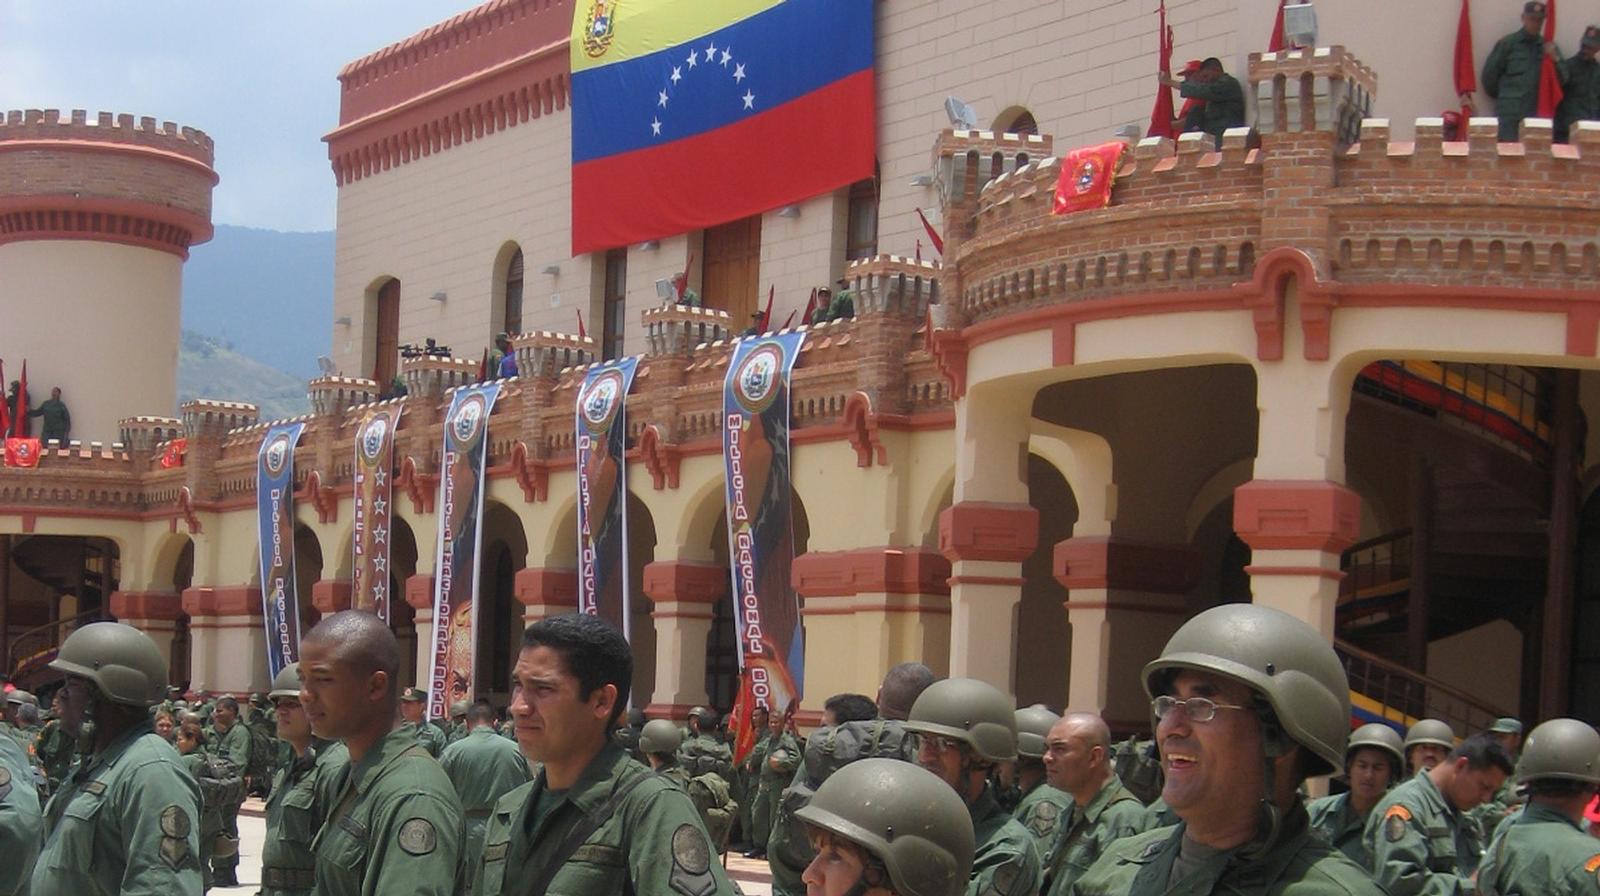 The armed forces will decide the fate of Venezuela's regime